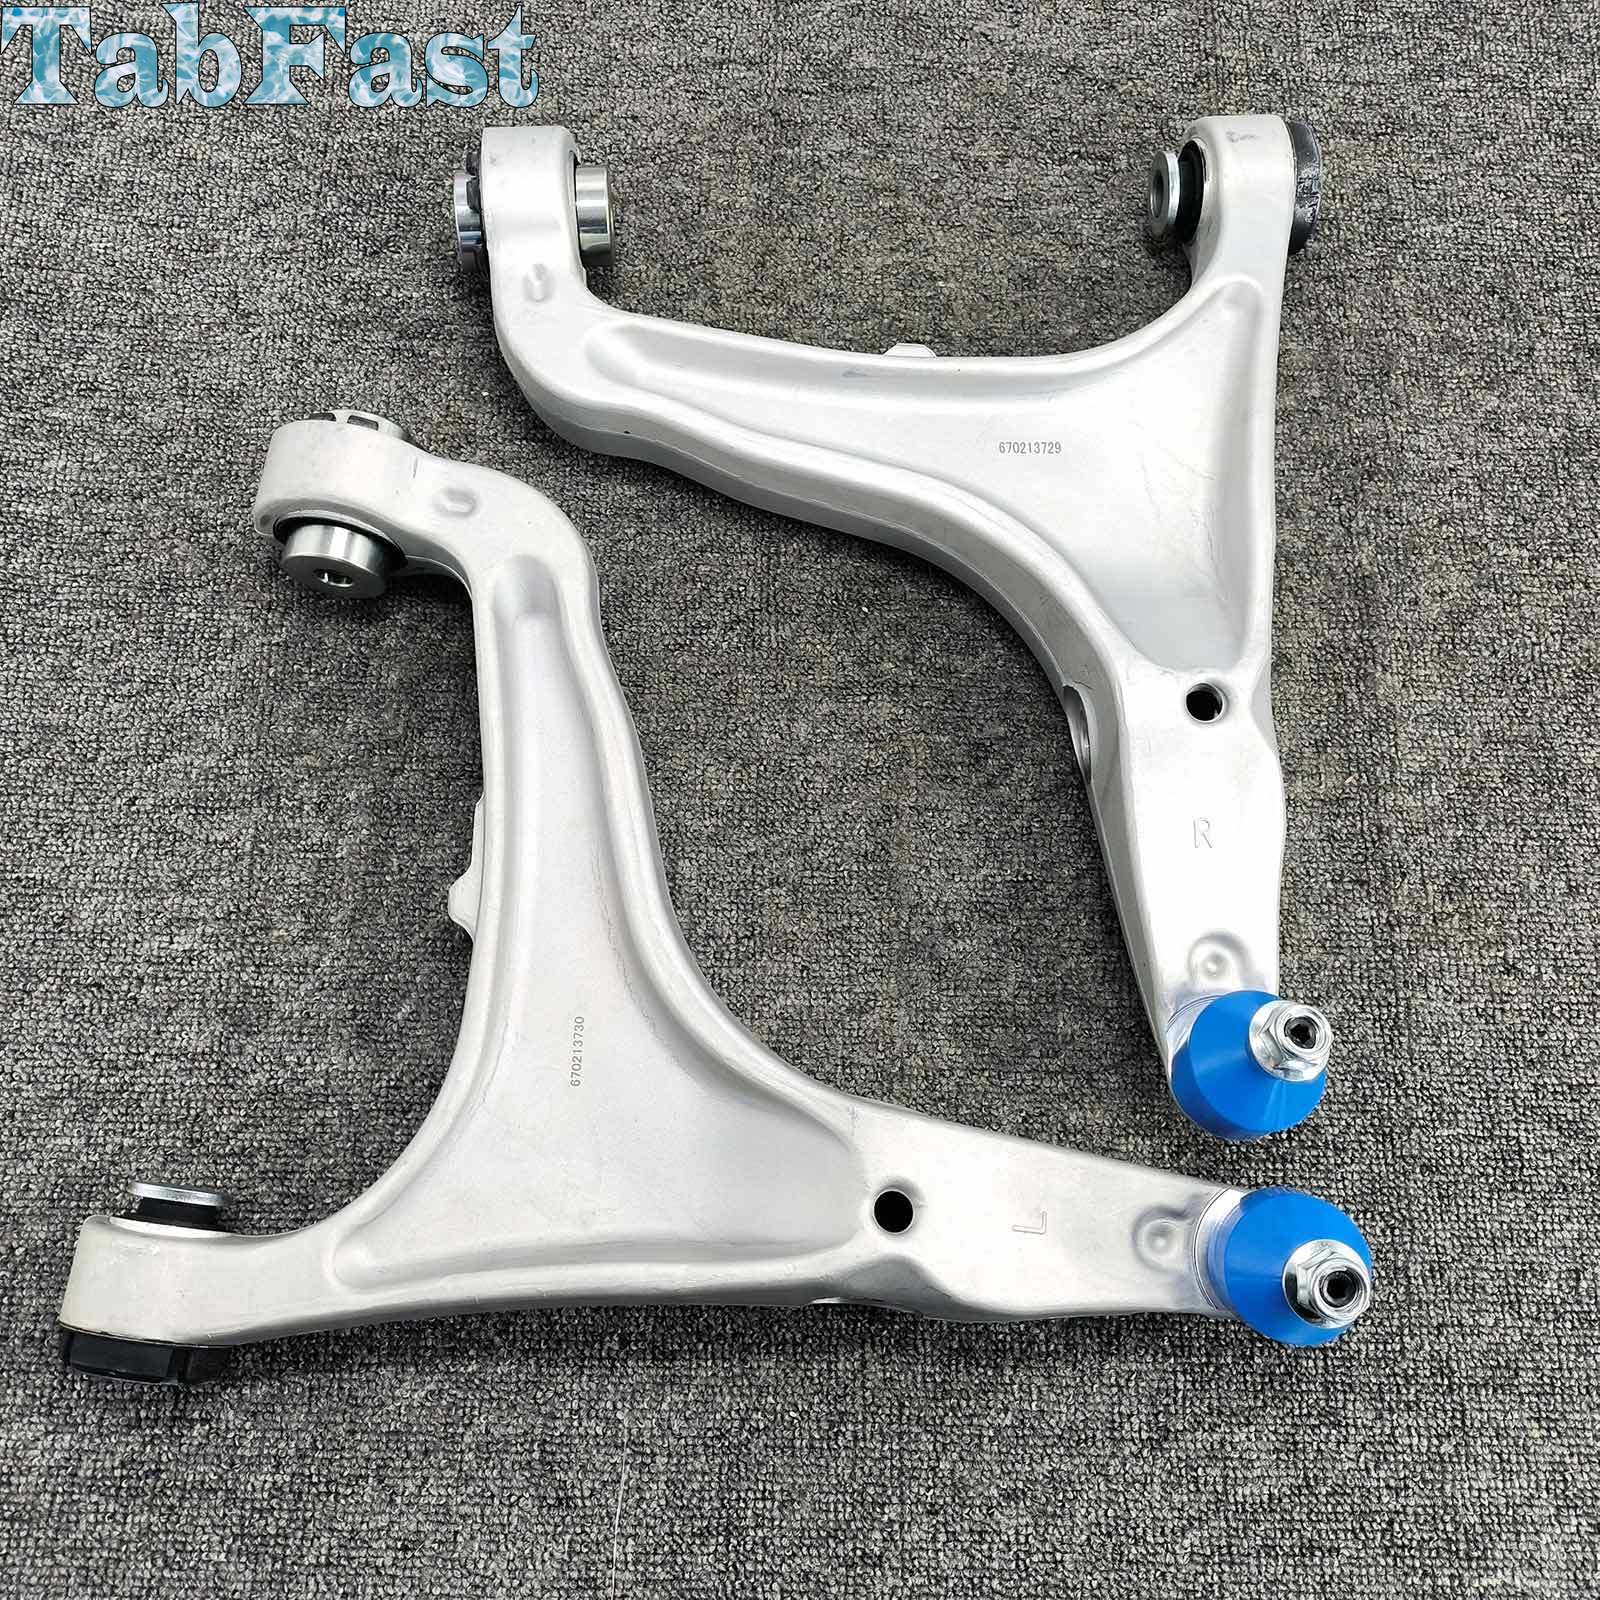 670213729 Left & Right Front Lower Control Arm for Maserati Levante 670213730